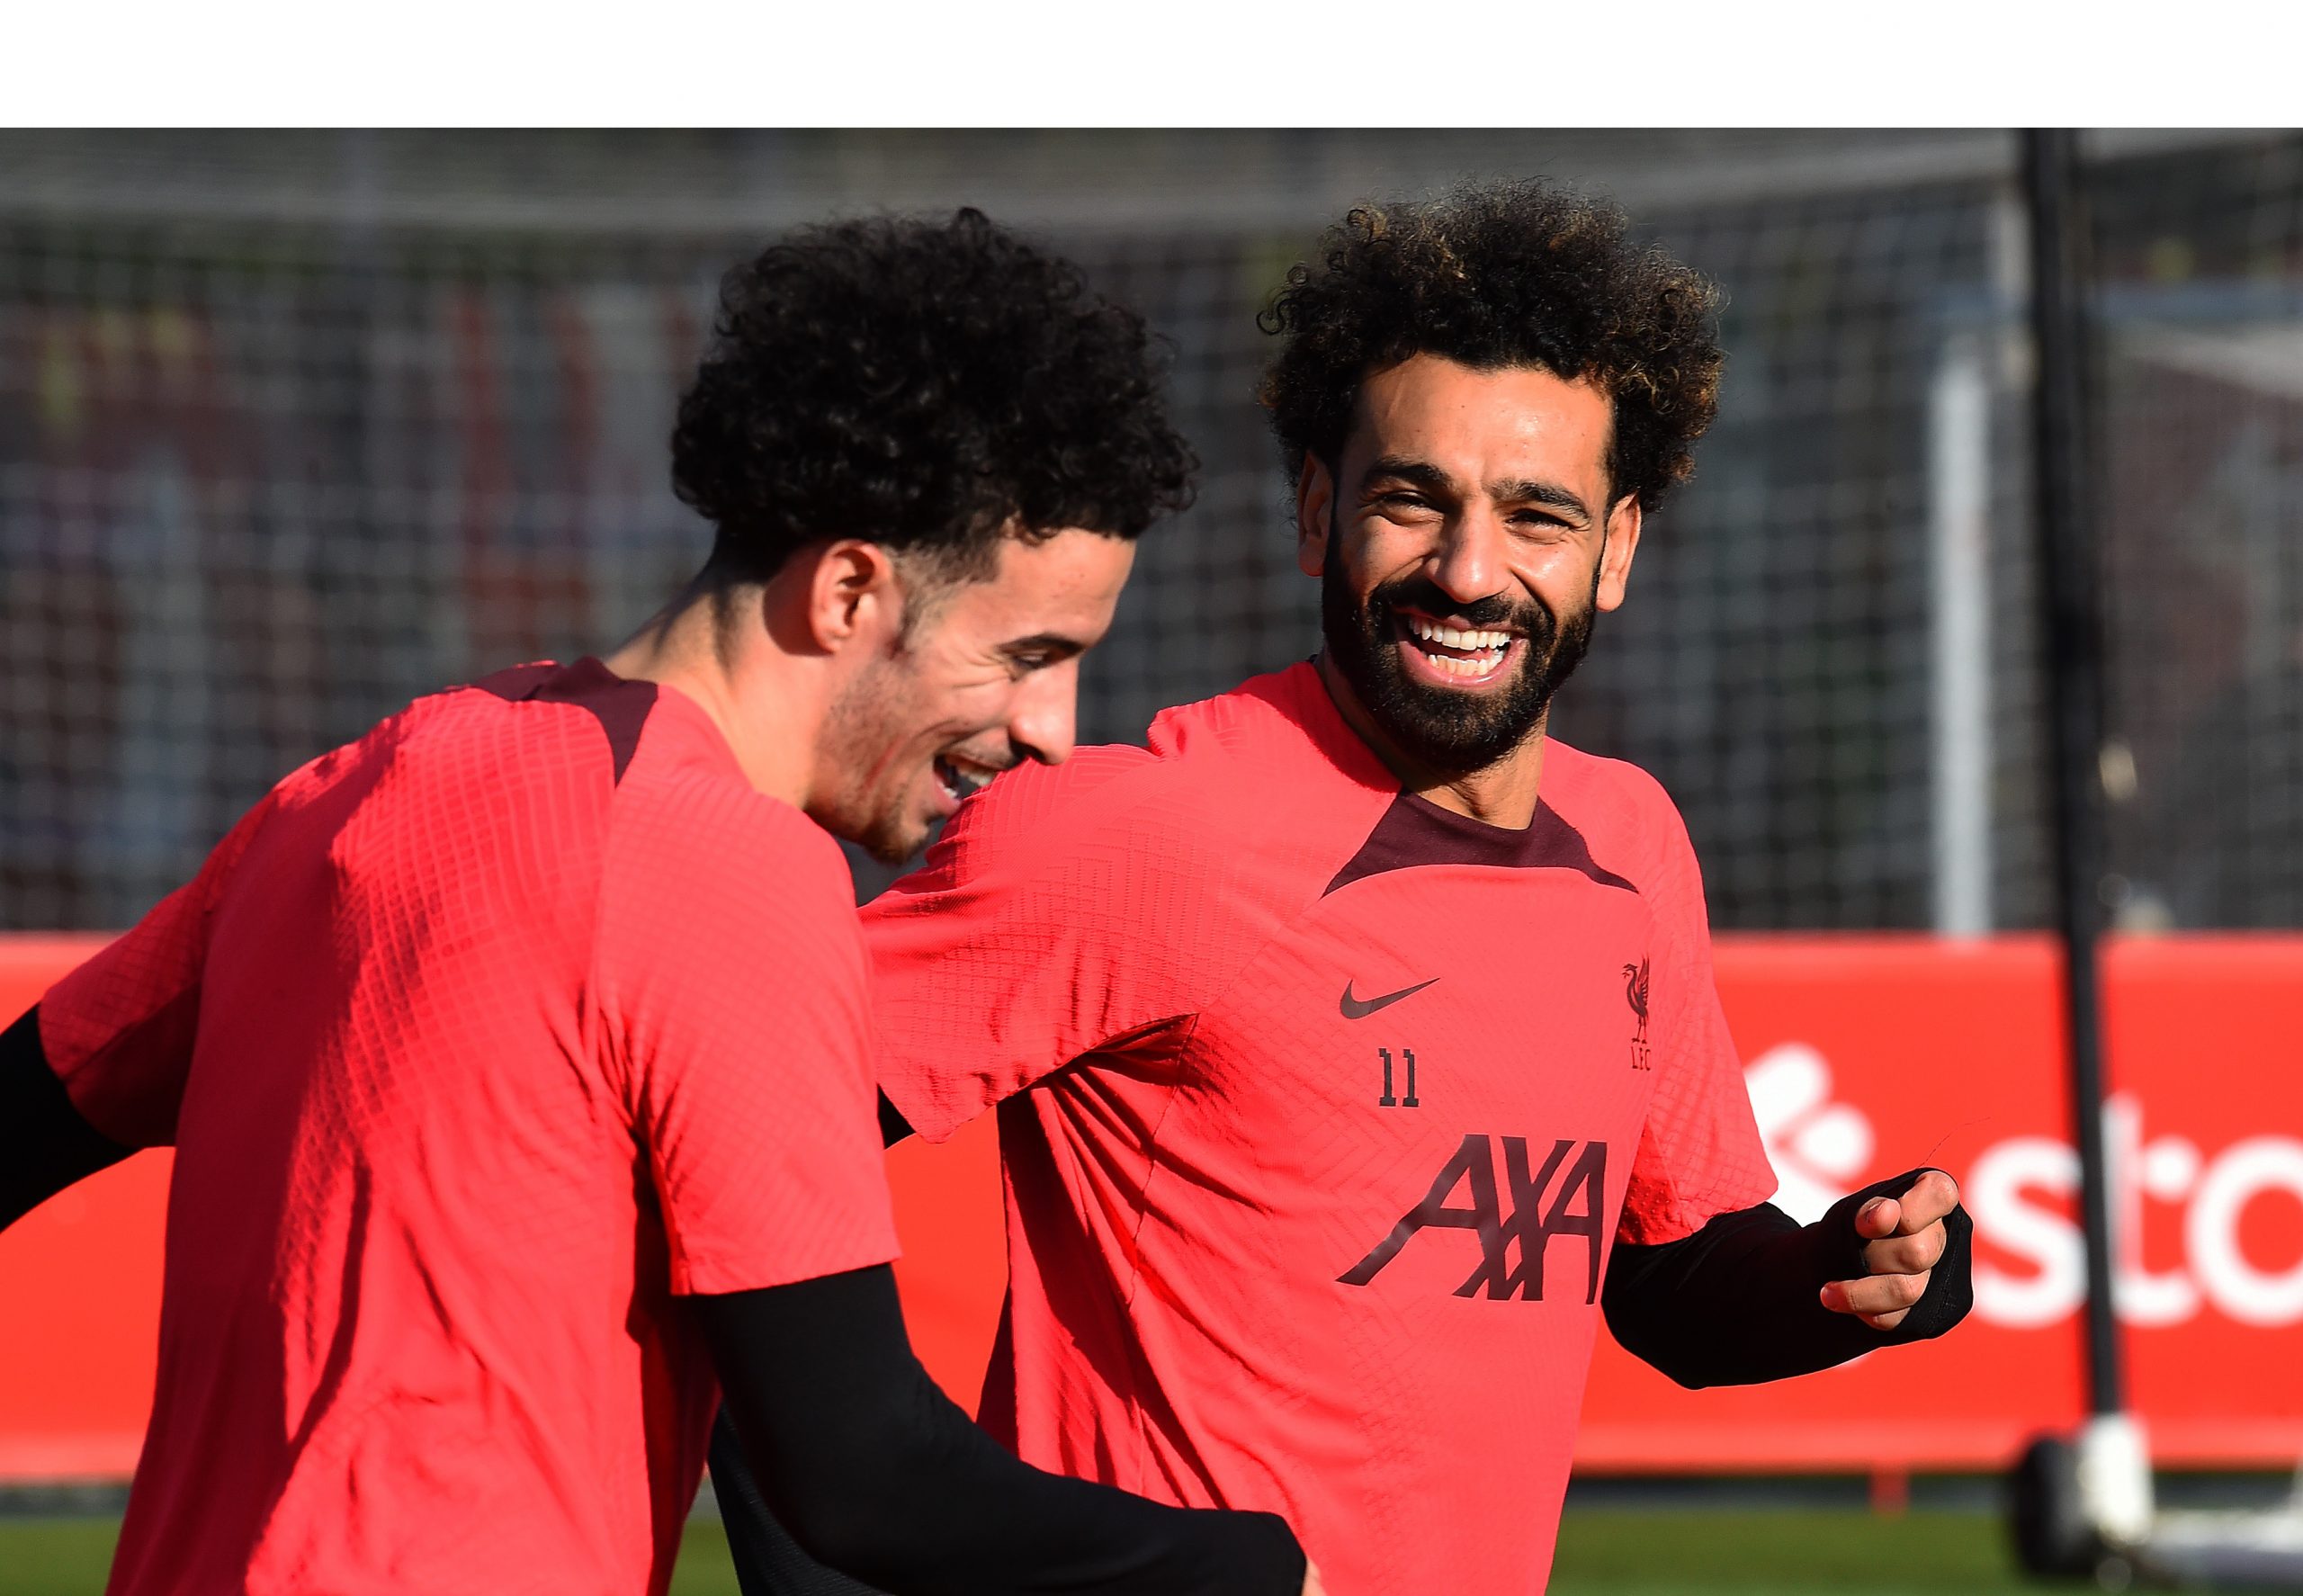 Mo Salah smiling with a teammate in training